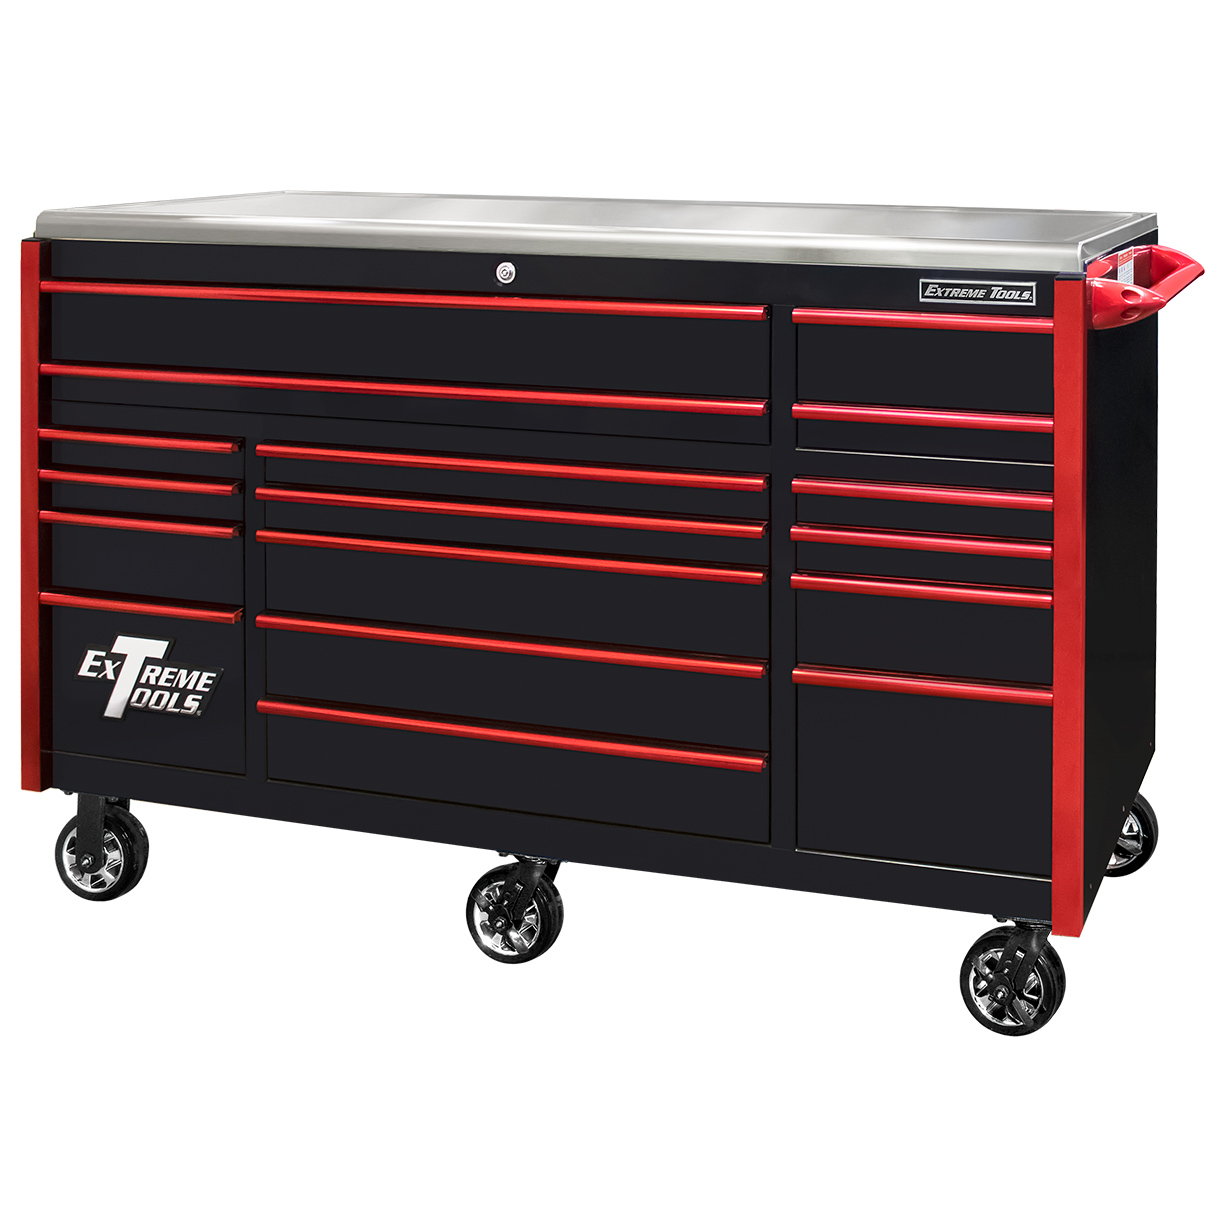 Professional 72 Inch Triple Bank Roller Cabinet, by Extreme Tools®